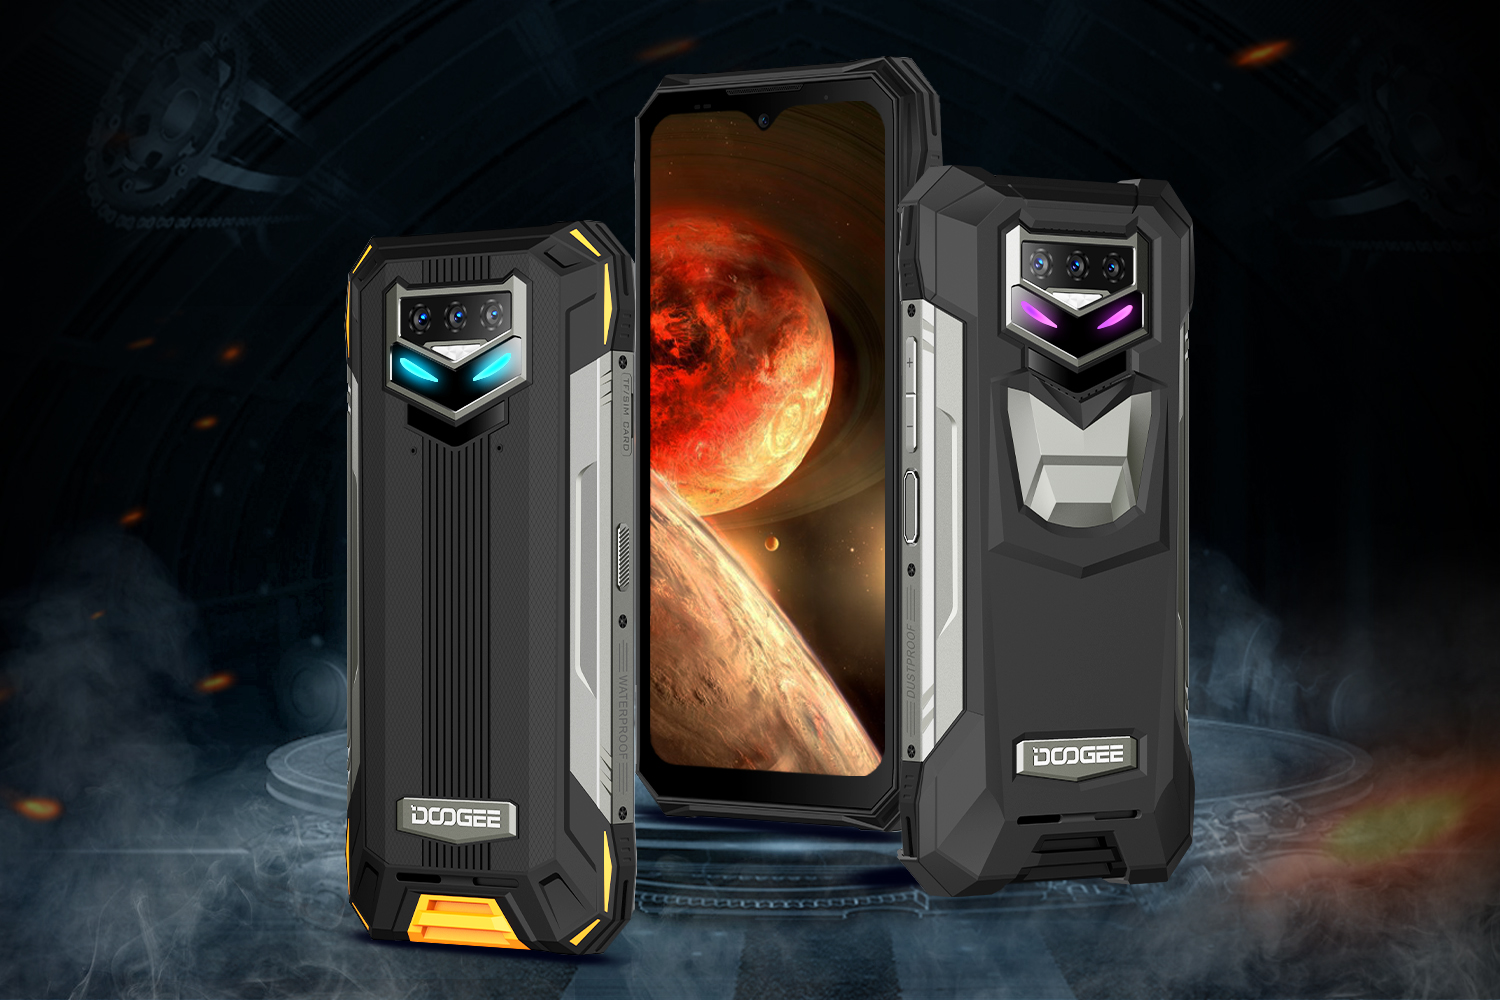 Doogee S89 Series – The Rugged Phone Series With 12000mAh Battery And RGB Lights